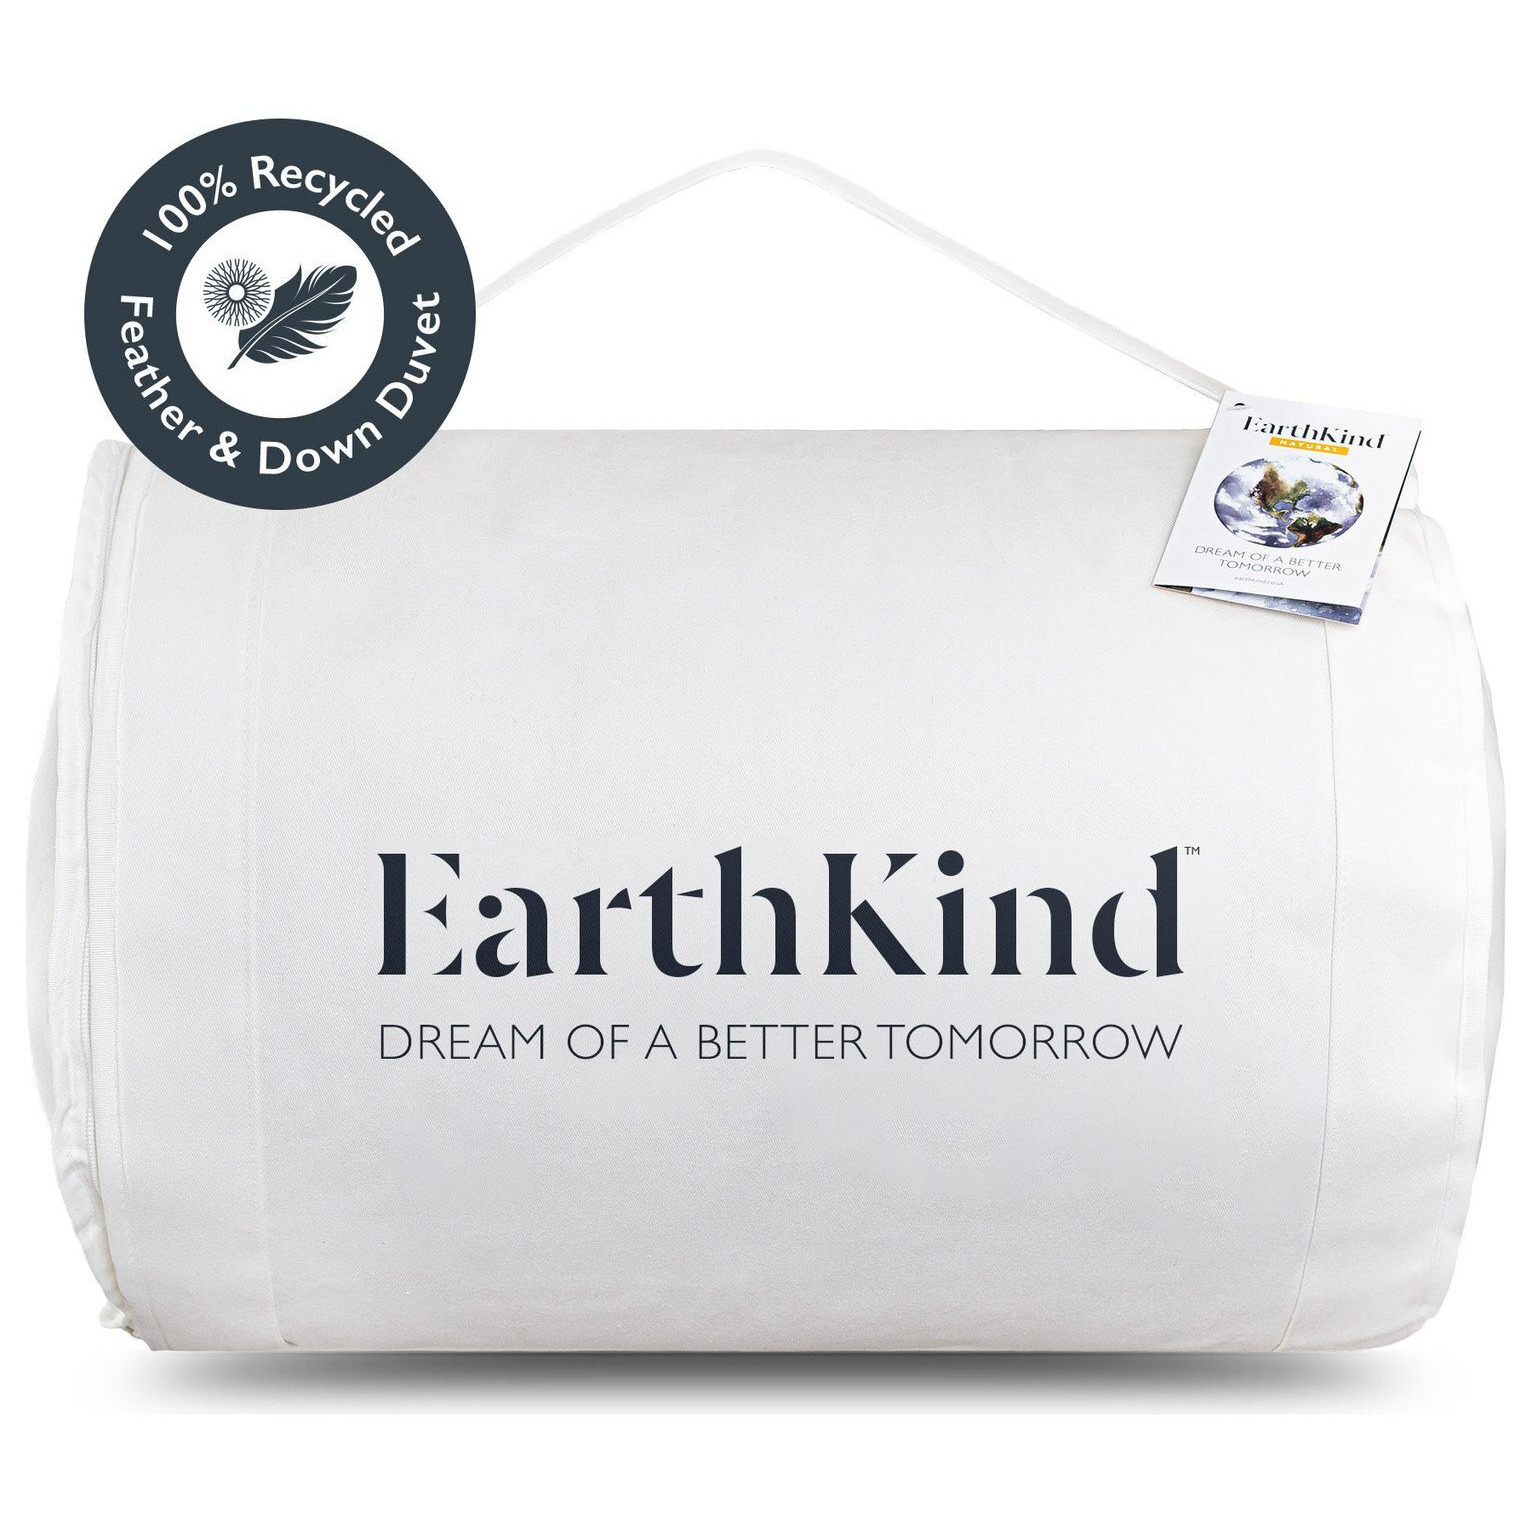 Earthkind Luxury Feather & Down 10.5 Tog Duvet - Superking - image 1